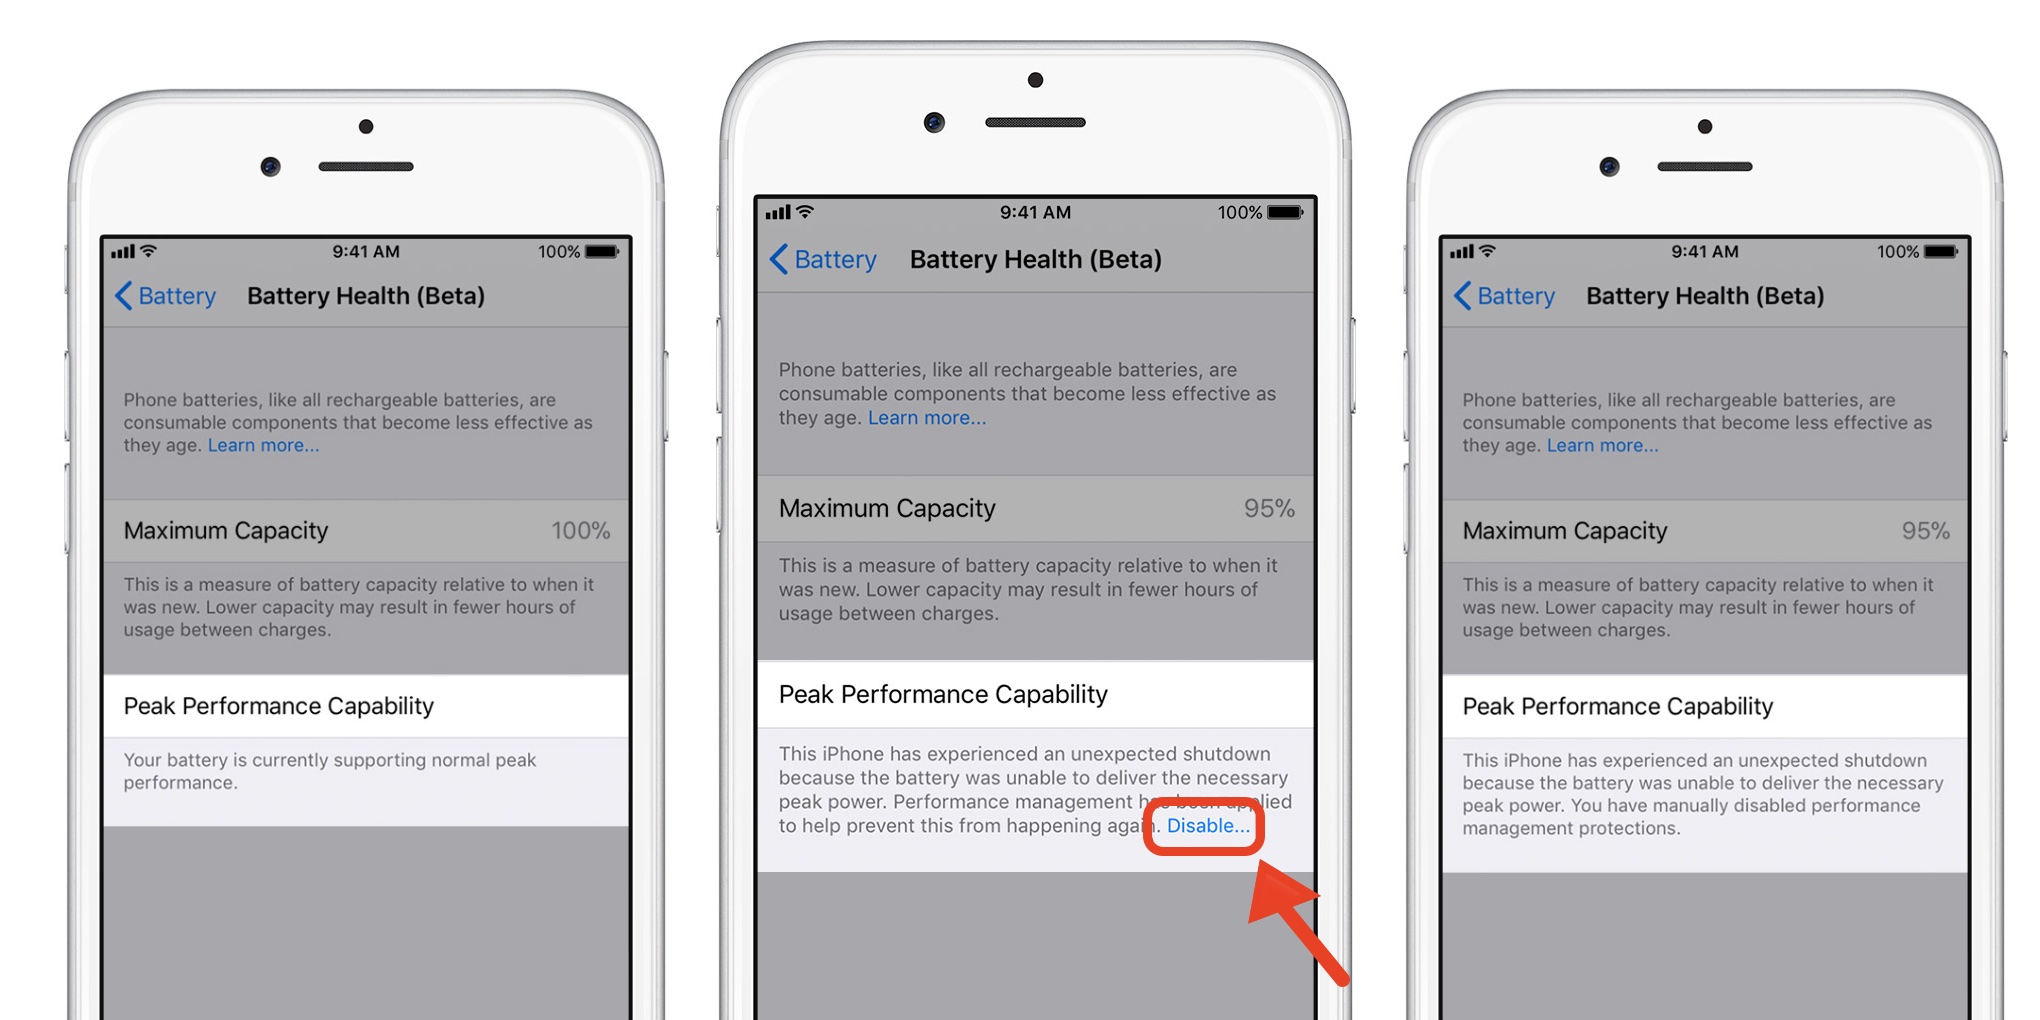 How to check battery health battery performance throttling in iOS 11.3 beta - 9to5Mac